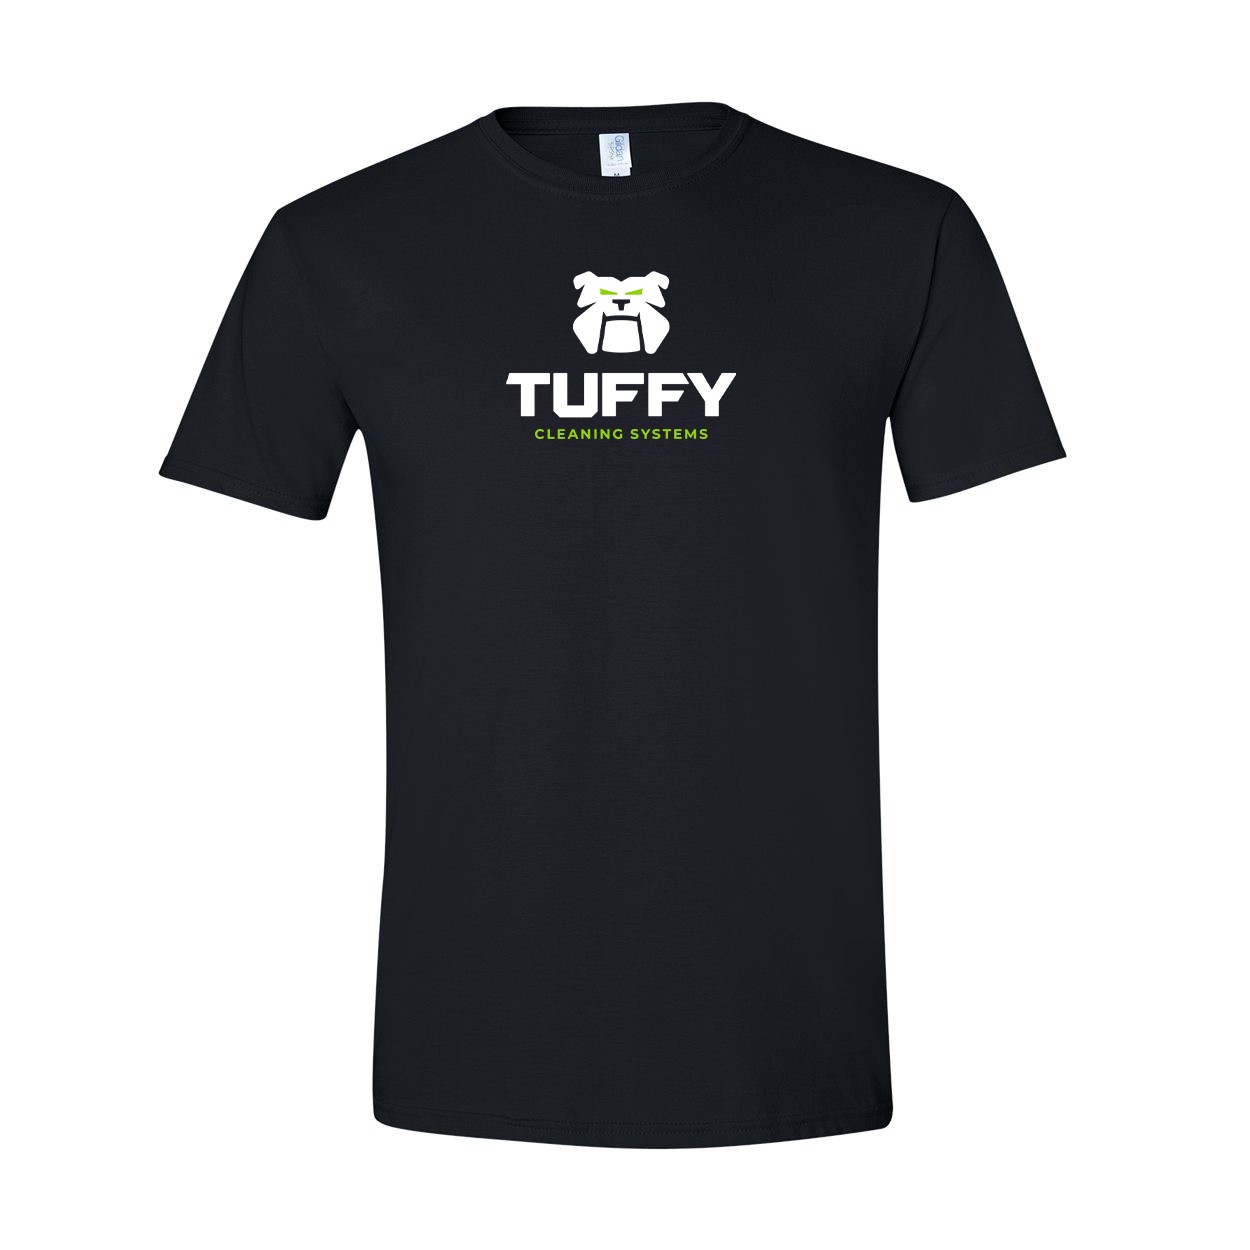 Tuffy Cleaning Systems Reverse Vertical Classic T-Shirt Black